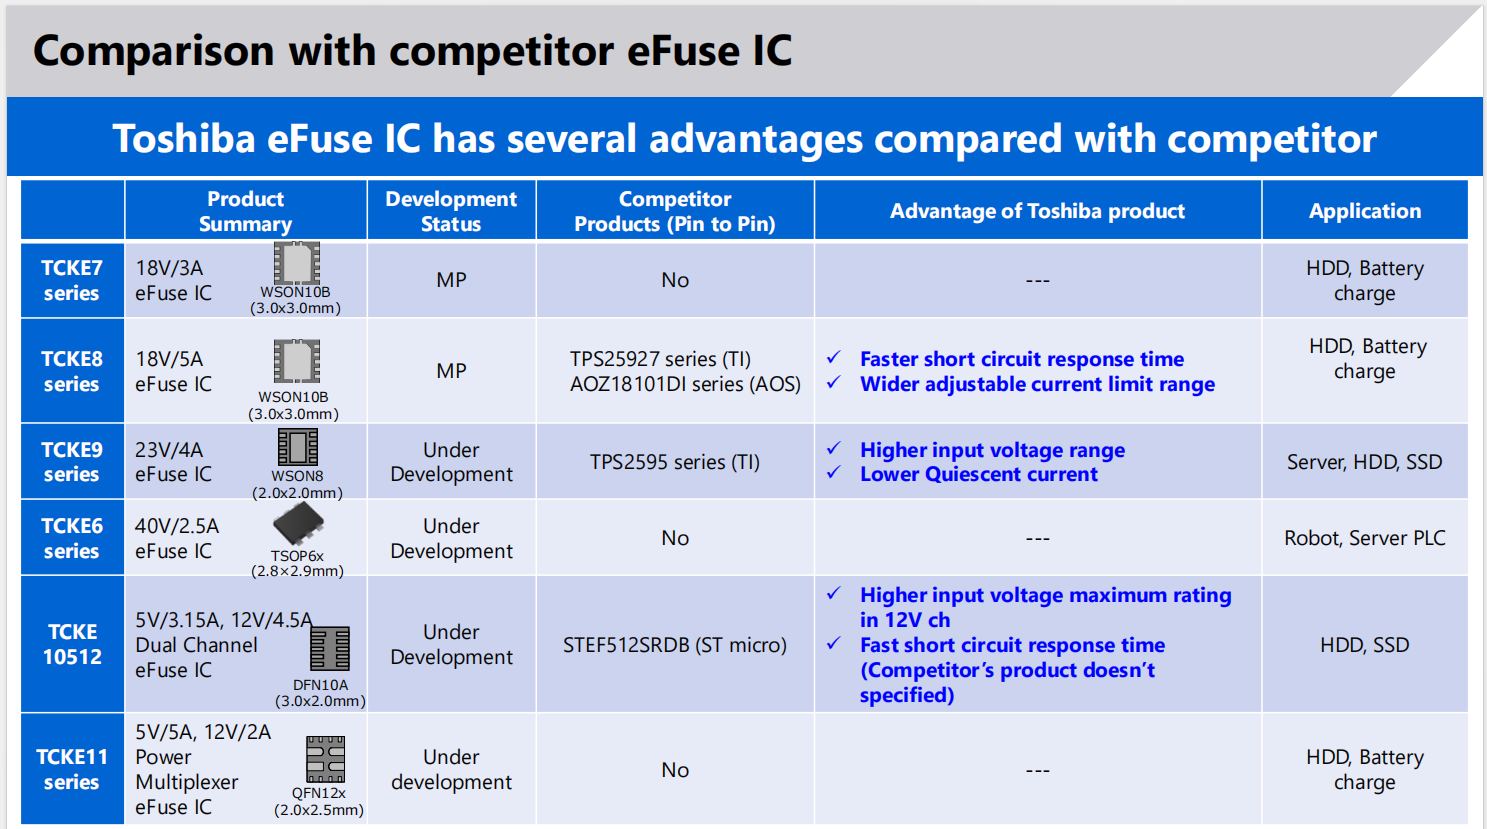 eFuse IC comparison with competitor